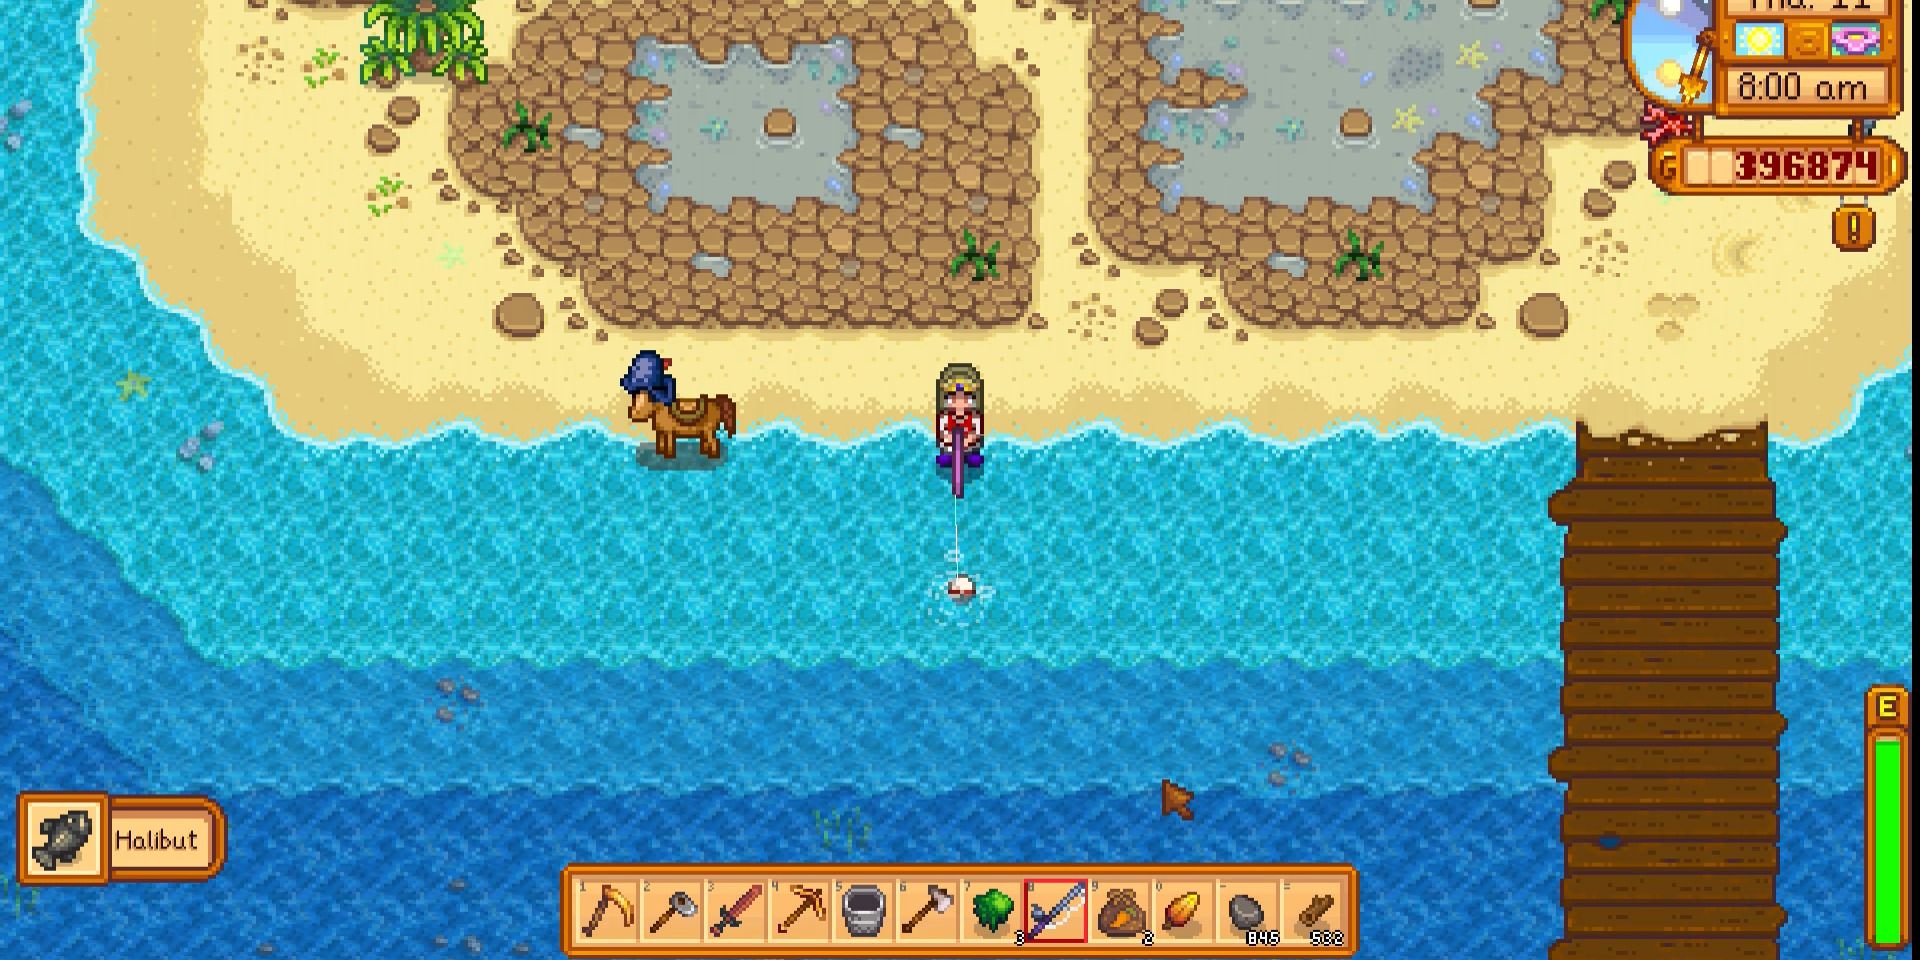 Image of a bubble spot in the ocean in Stardew Valley